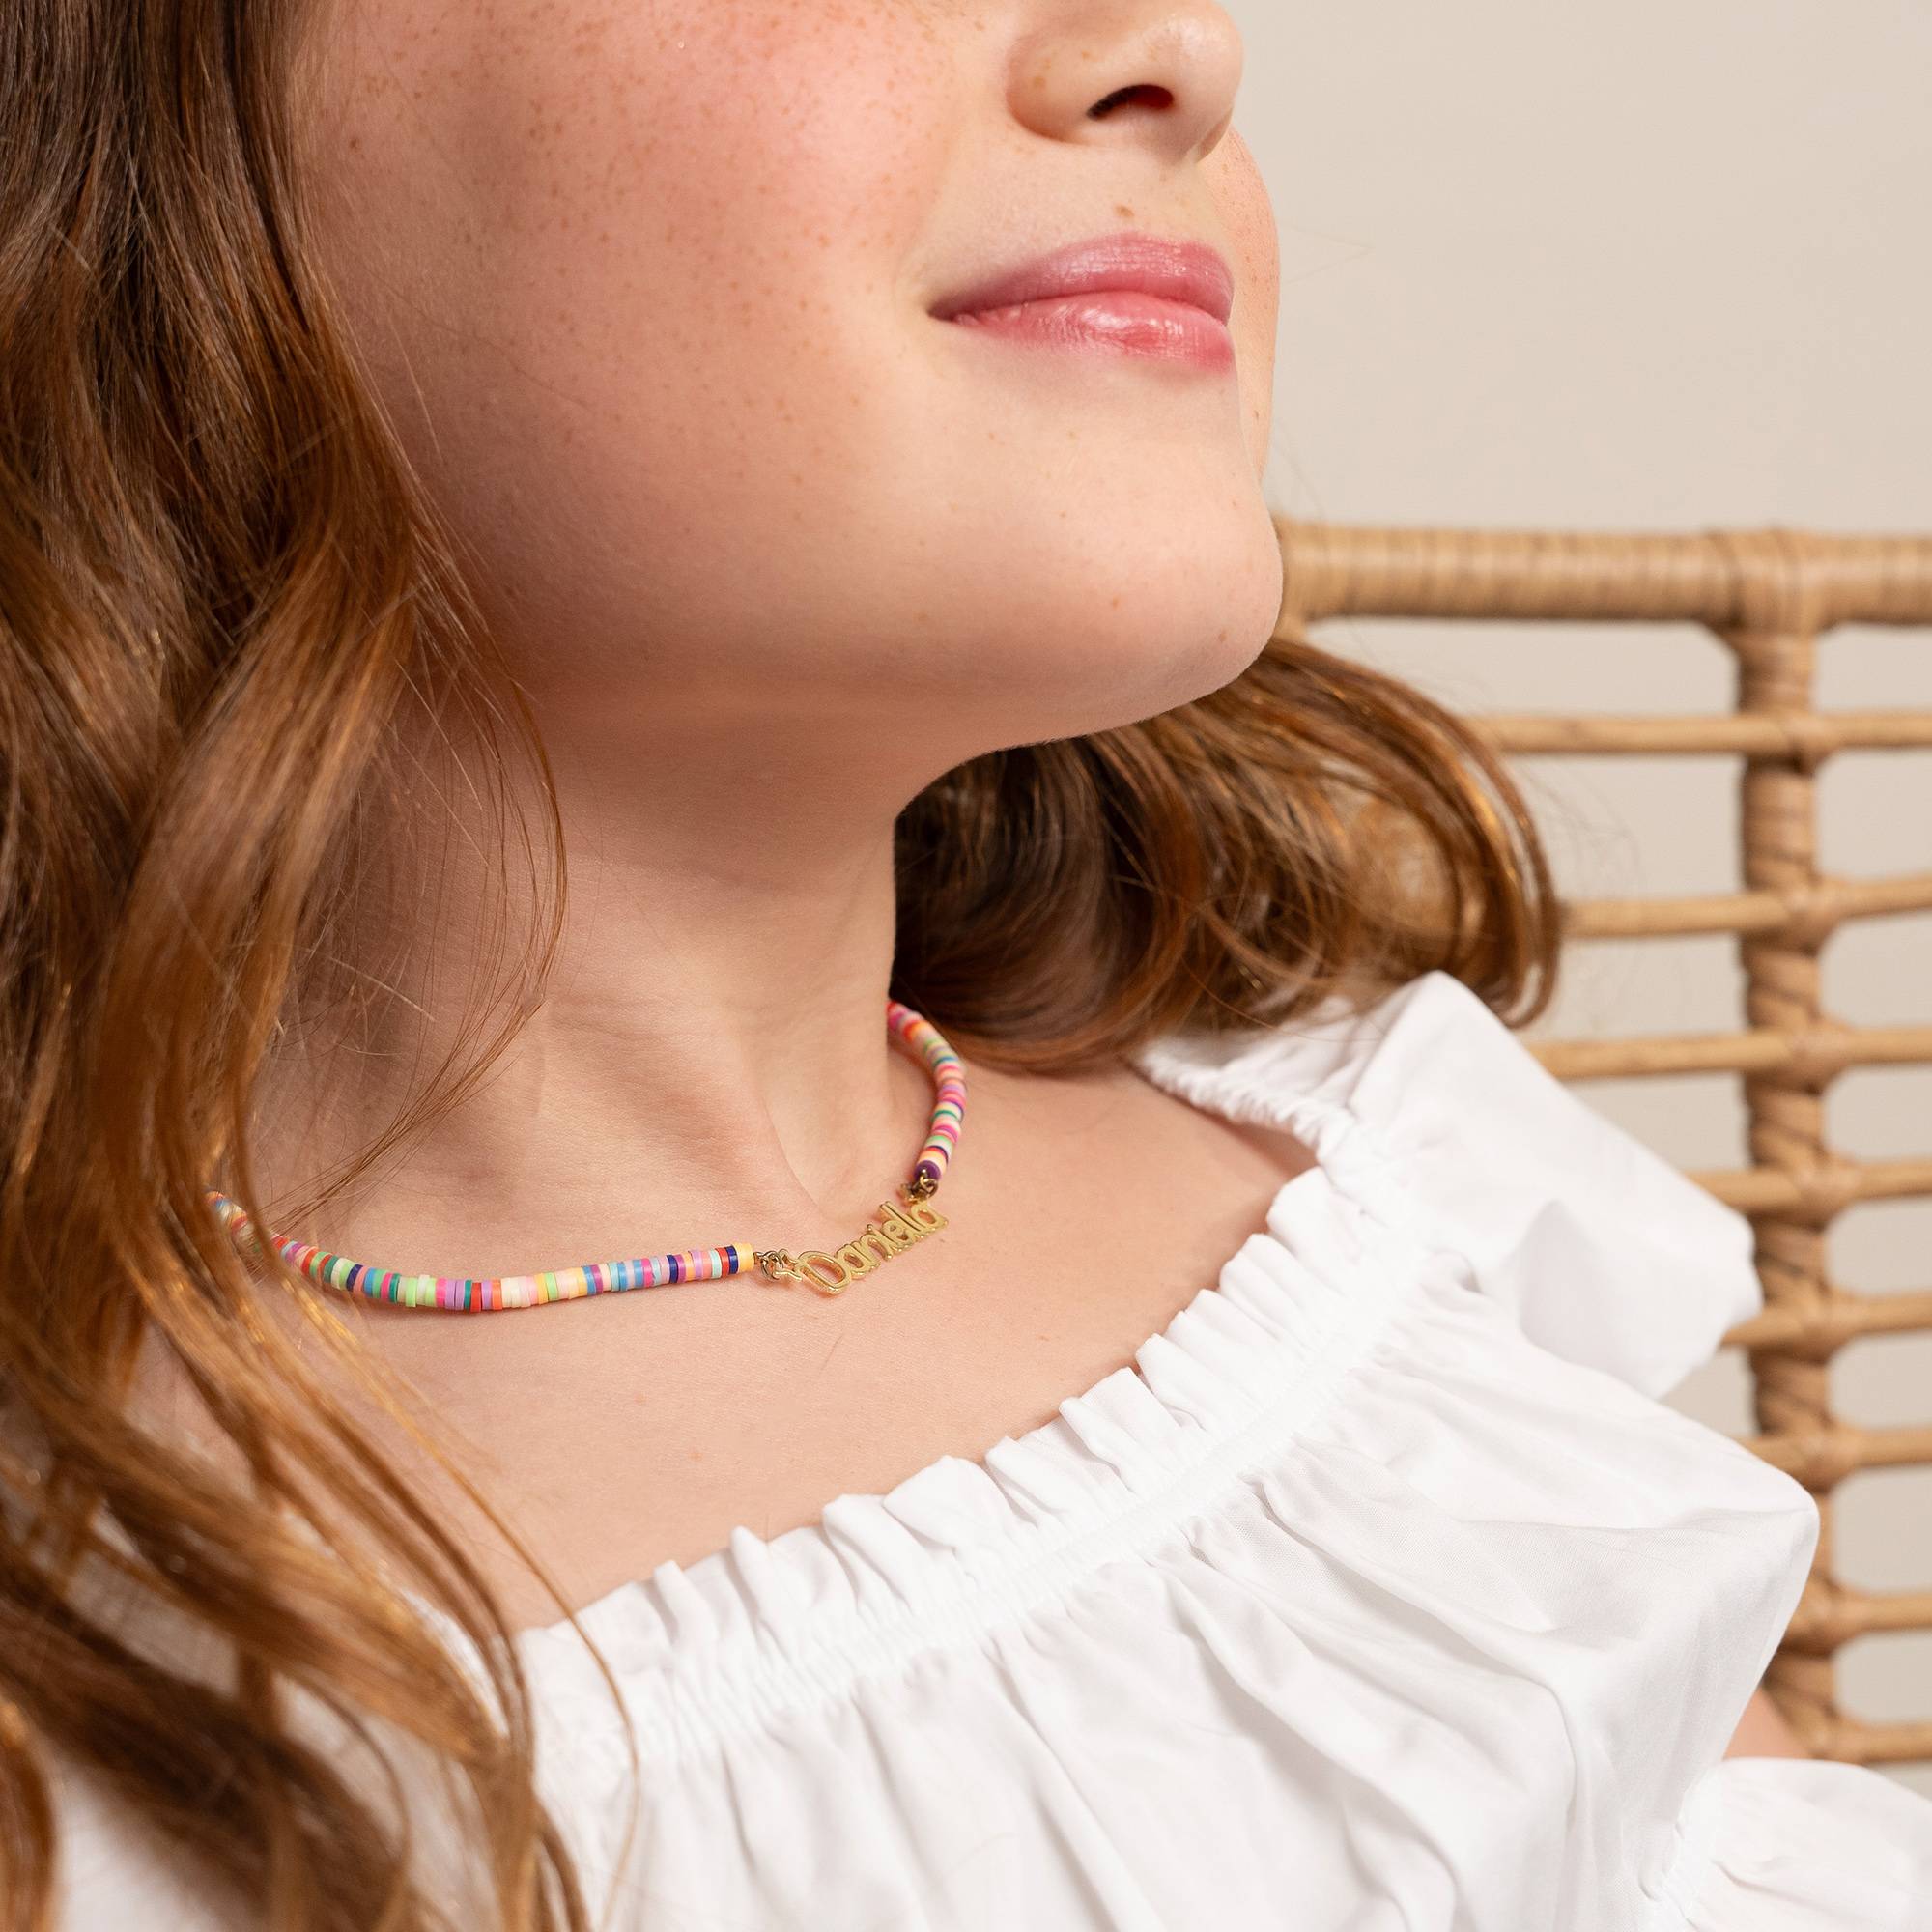 Rainbow Magic Girls Name Necklace in Gold Vermeil-2 product photo